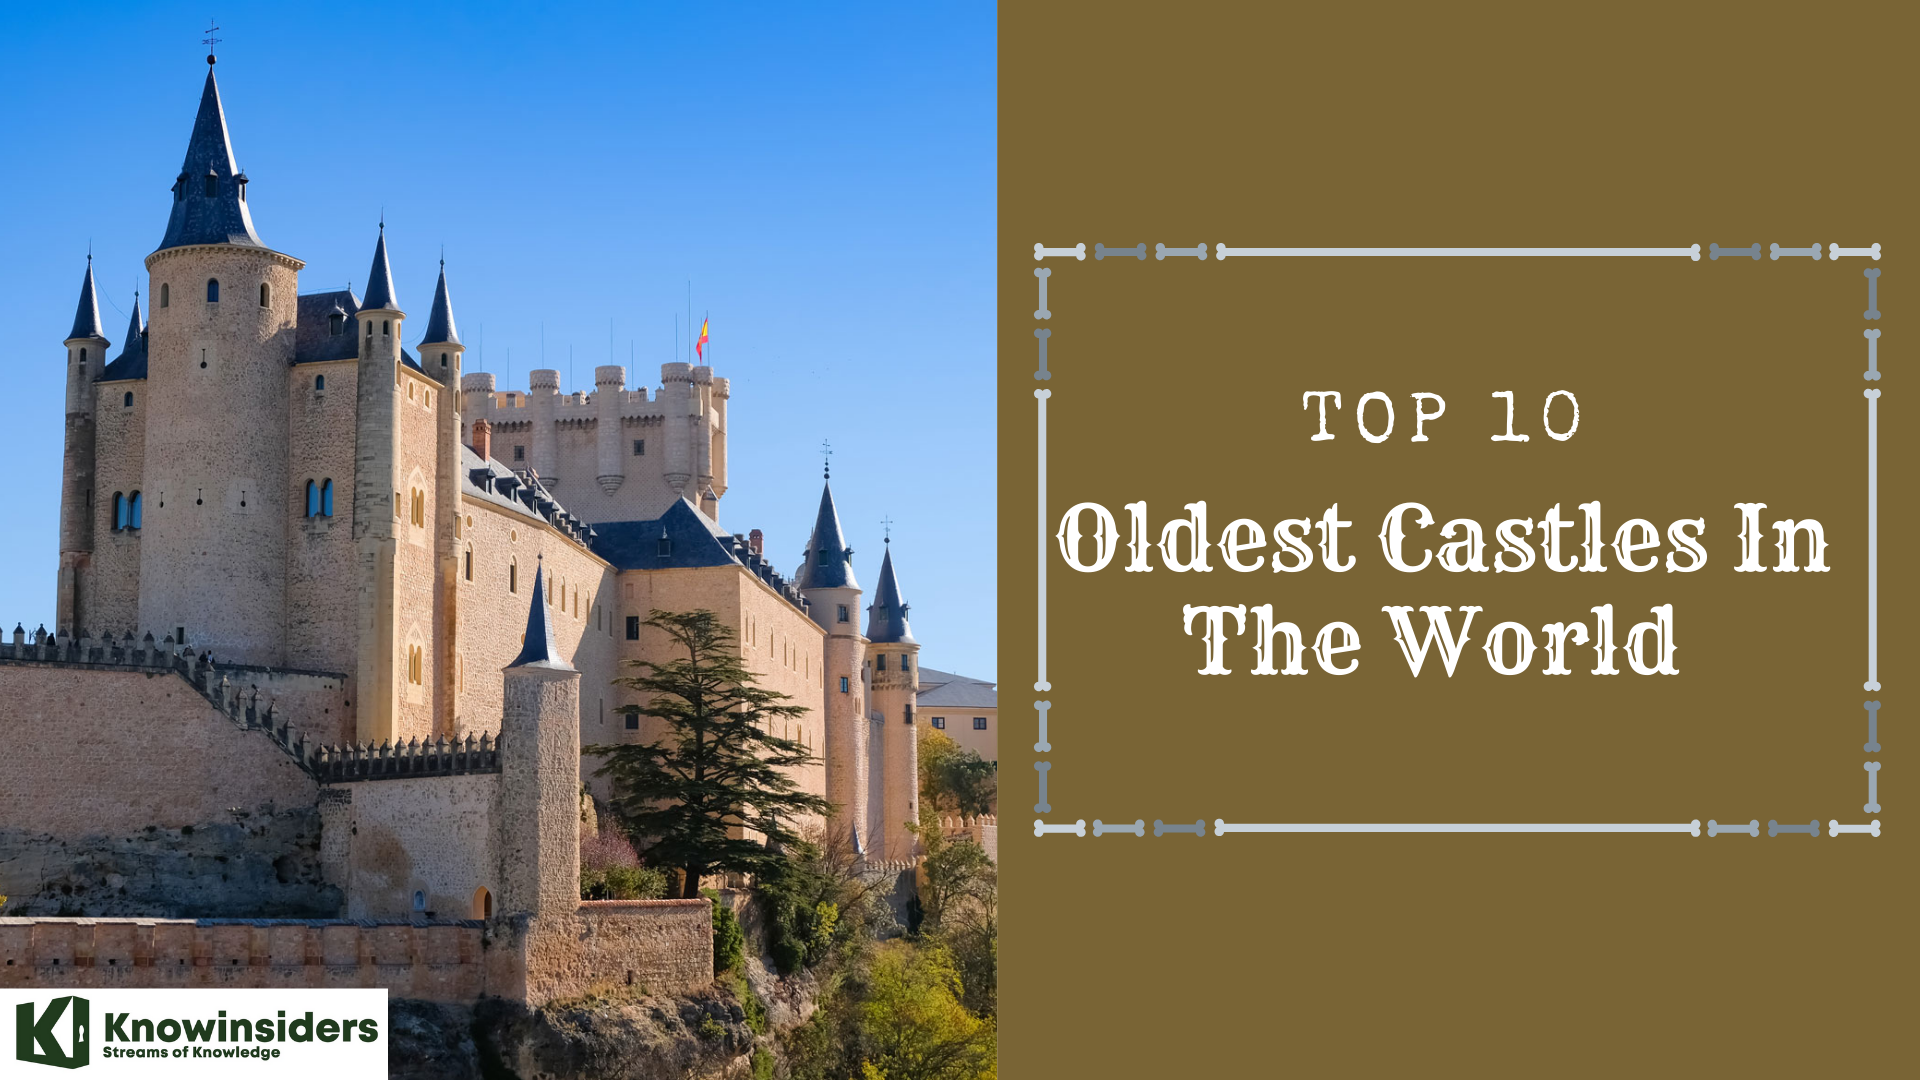 Top 10 Oldest Castles In The World